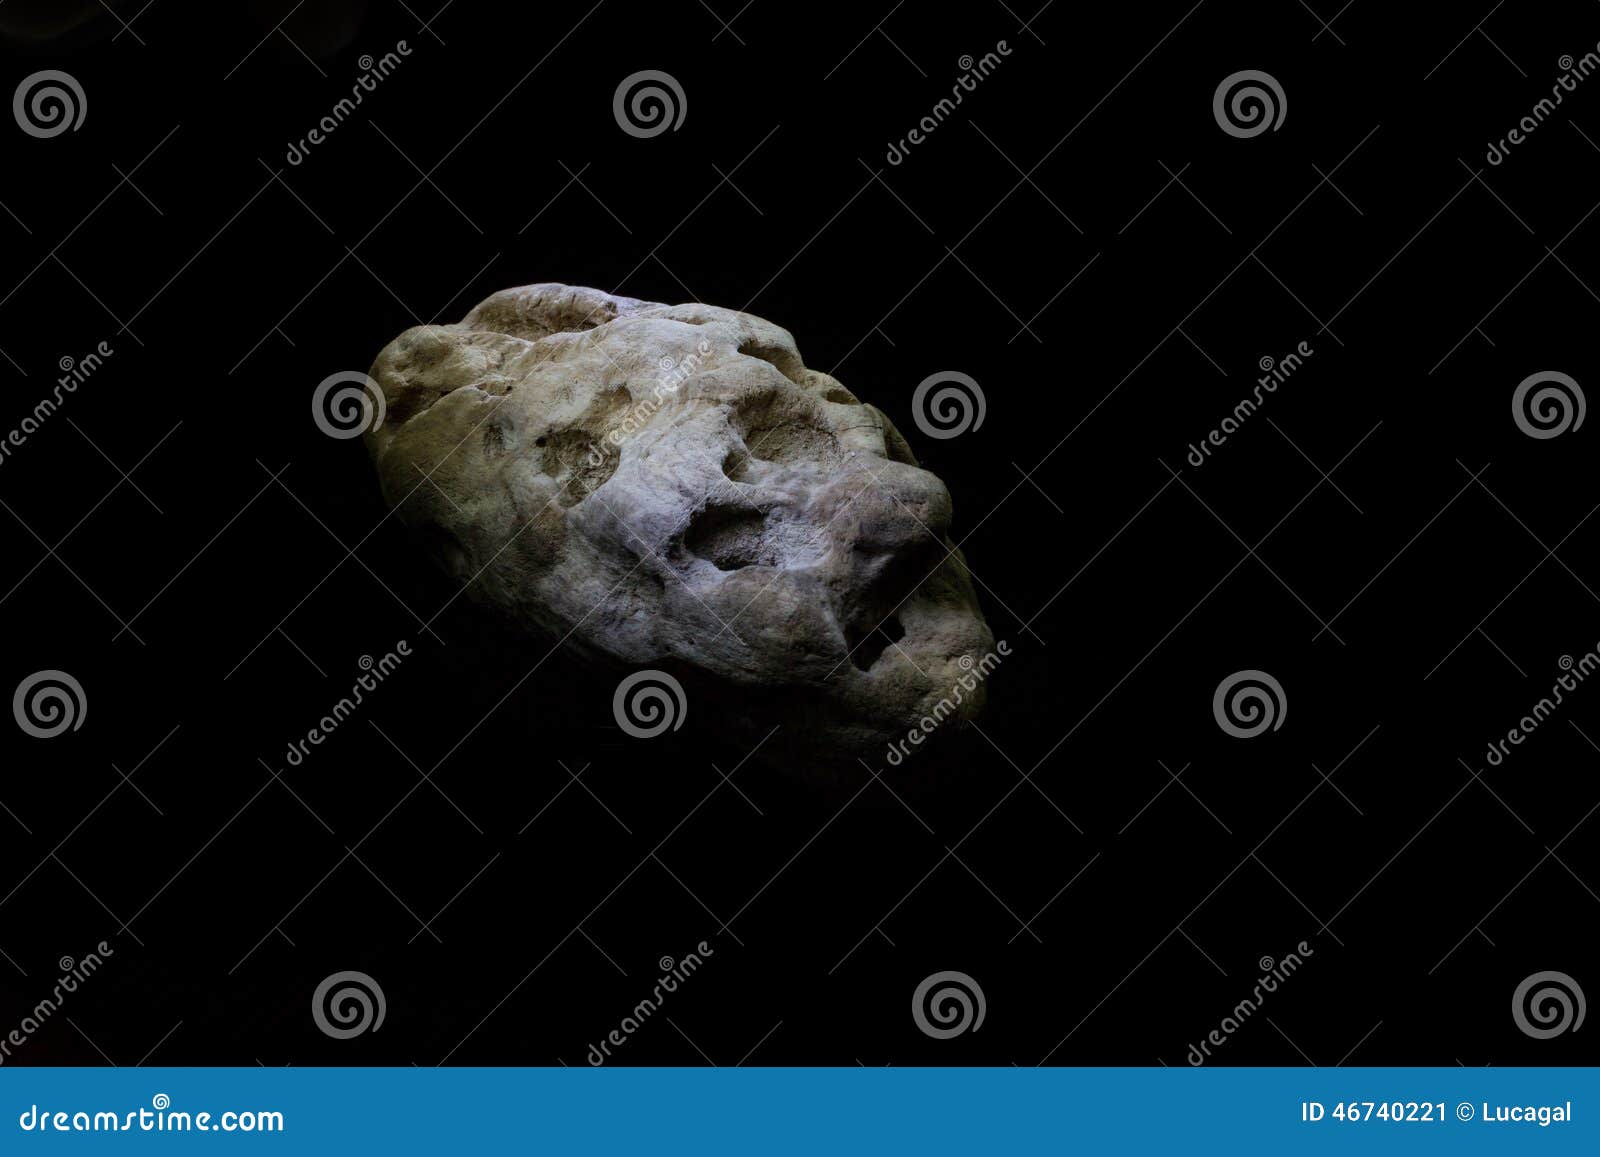 asteroid in deep space